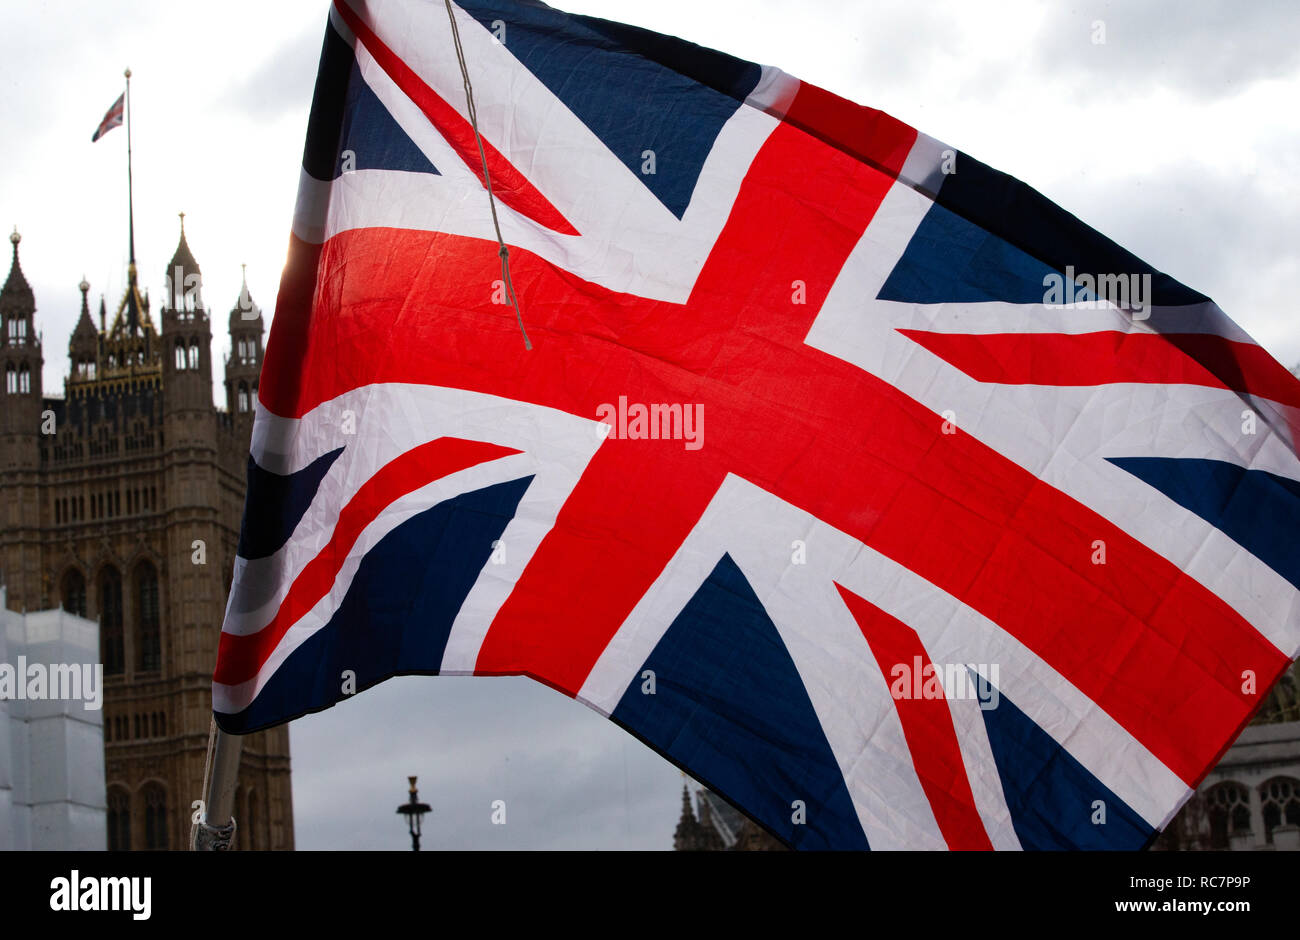 A Union Jack Flag,the flag of Great Britain, flies in front of the Houses of Parliament as Parliament decides if Britain is leaving the EU on March 29. Stock Photo